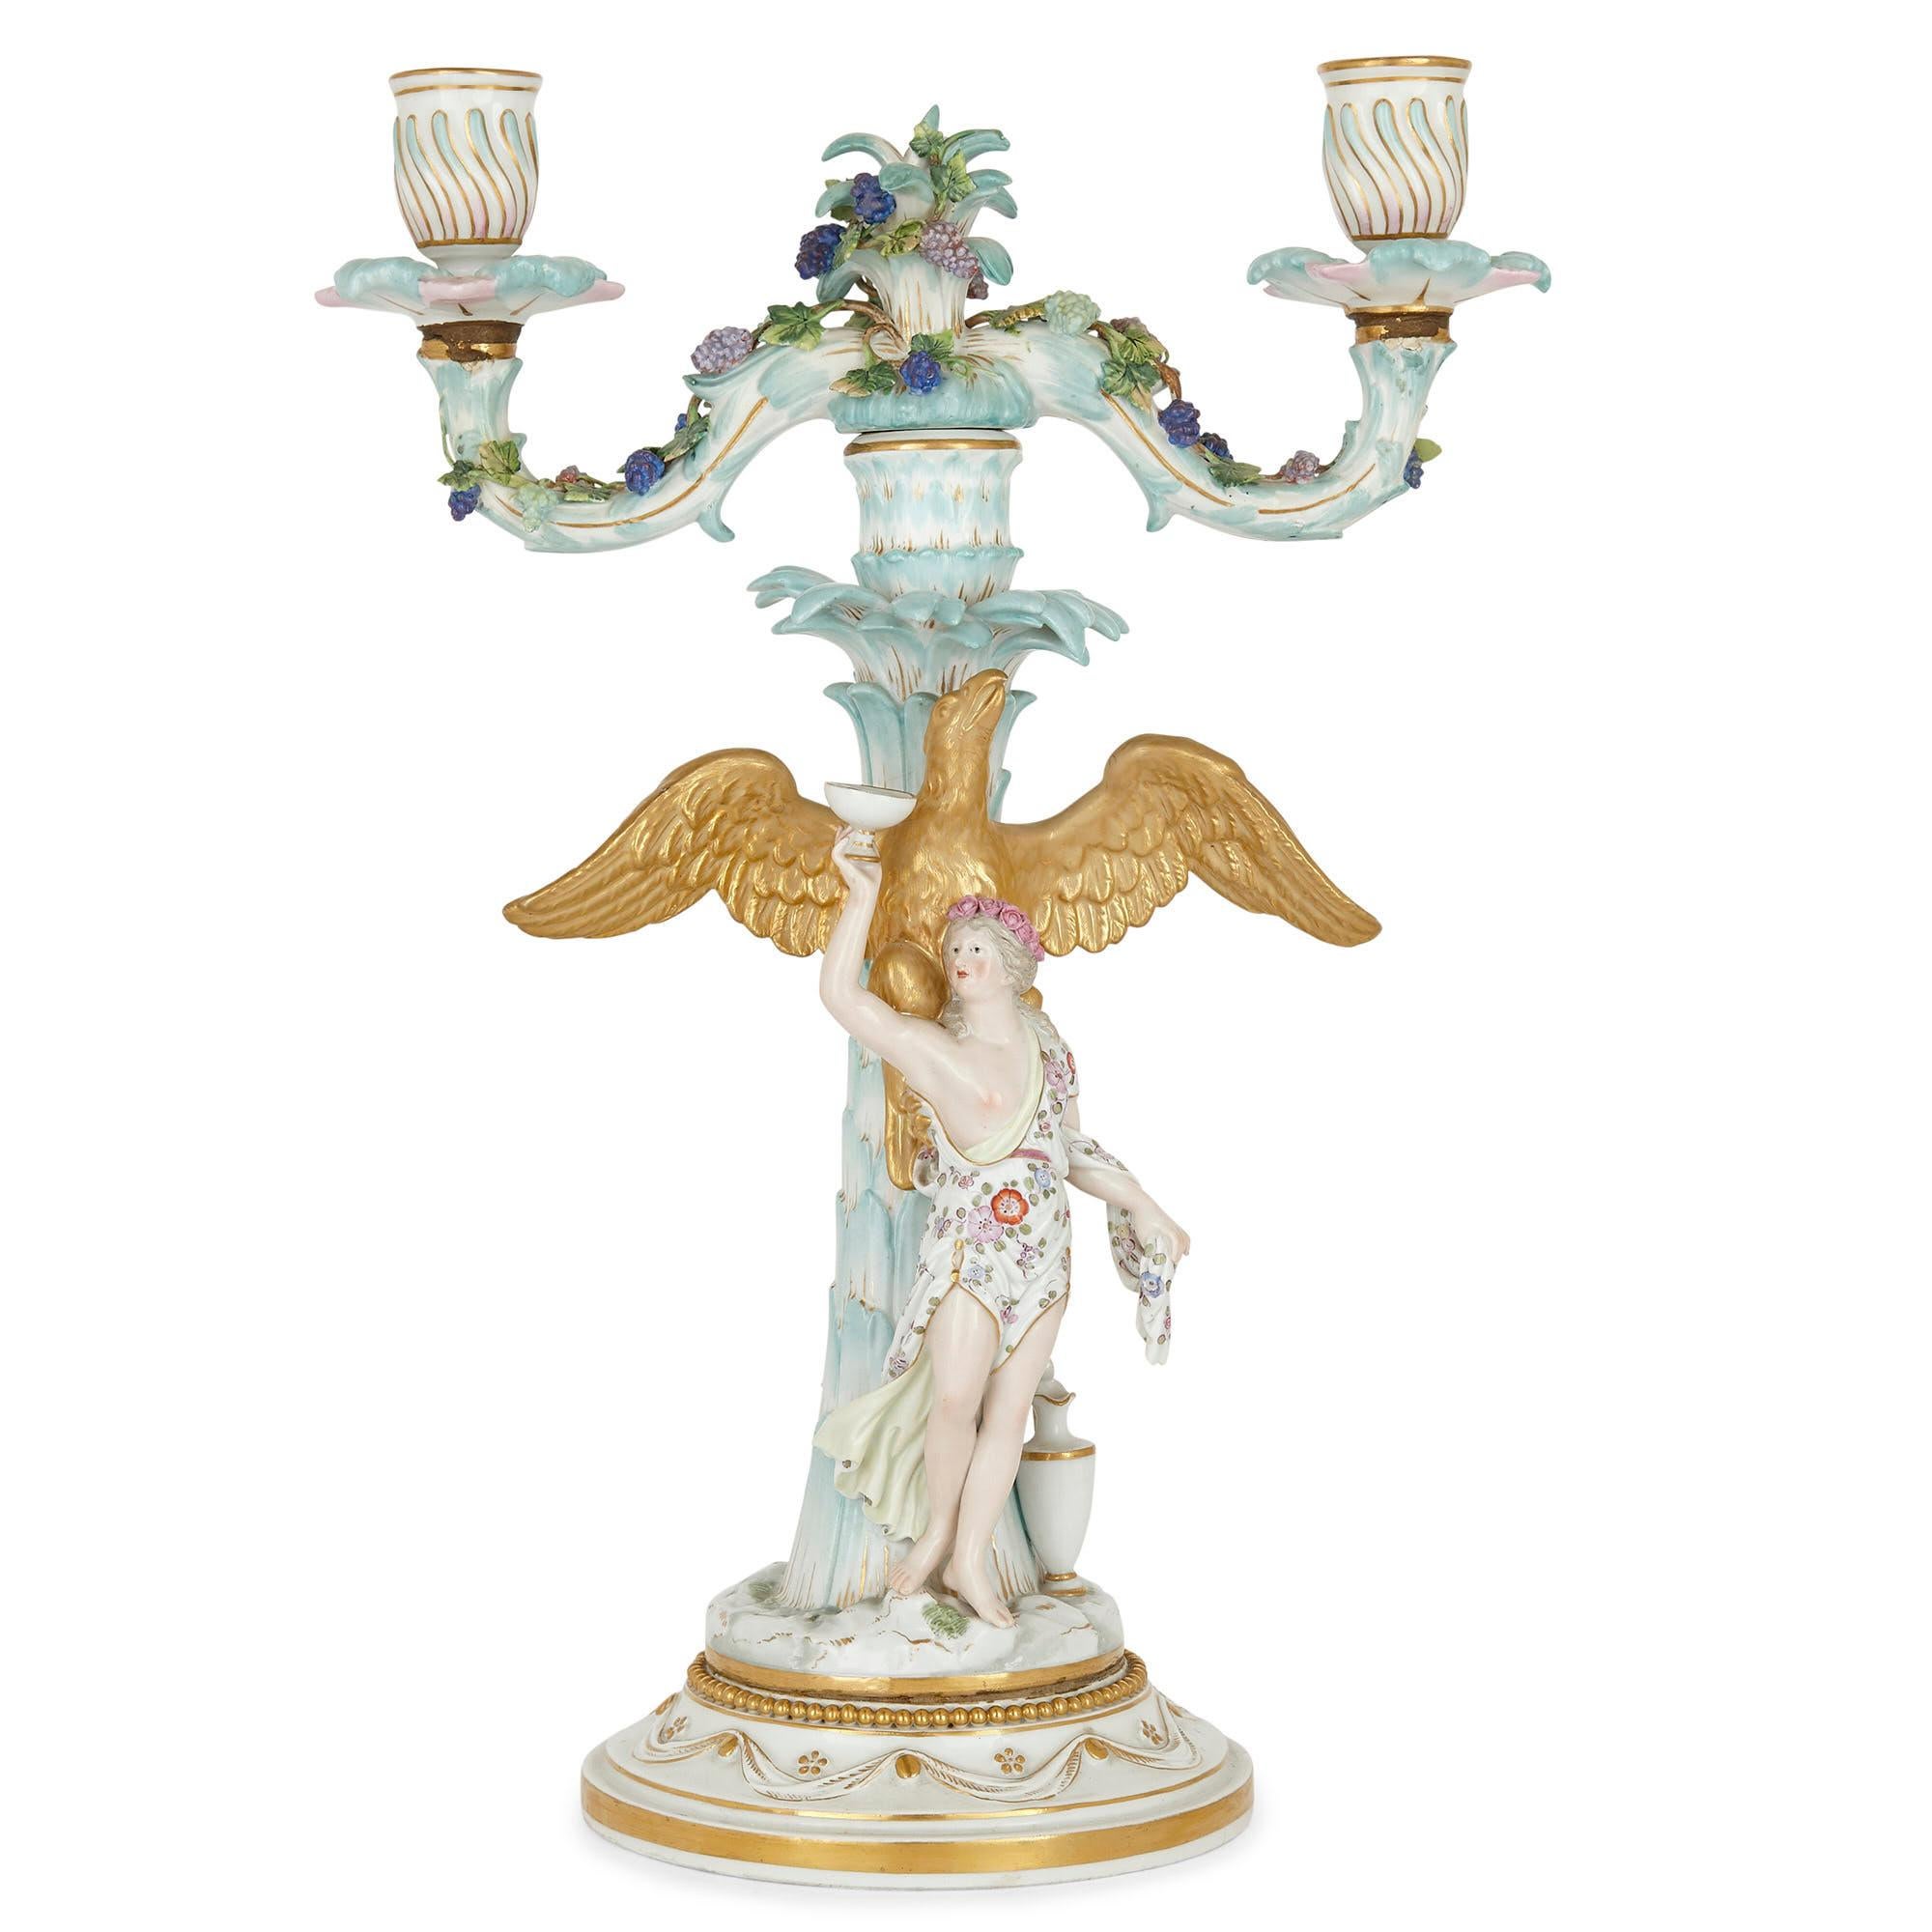 Pair of Rococo style German Meissen Porcelain candelabras
German, circa 1860
Measures: Height 37cm, width 26cm, depth 15cm

Rococo-style detailing, including figures representing Ganymede and Hebe, animals, urns, and floral motifs, abound in